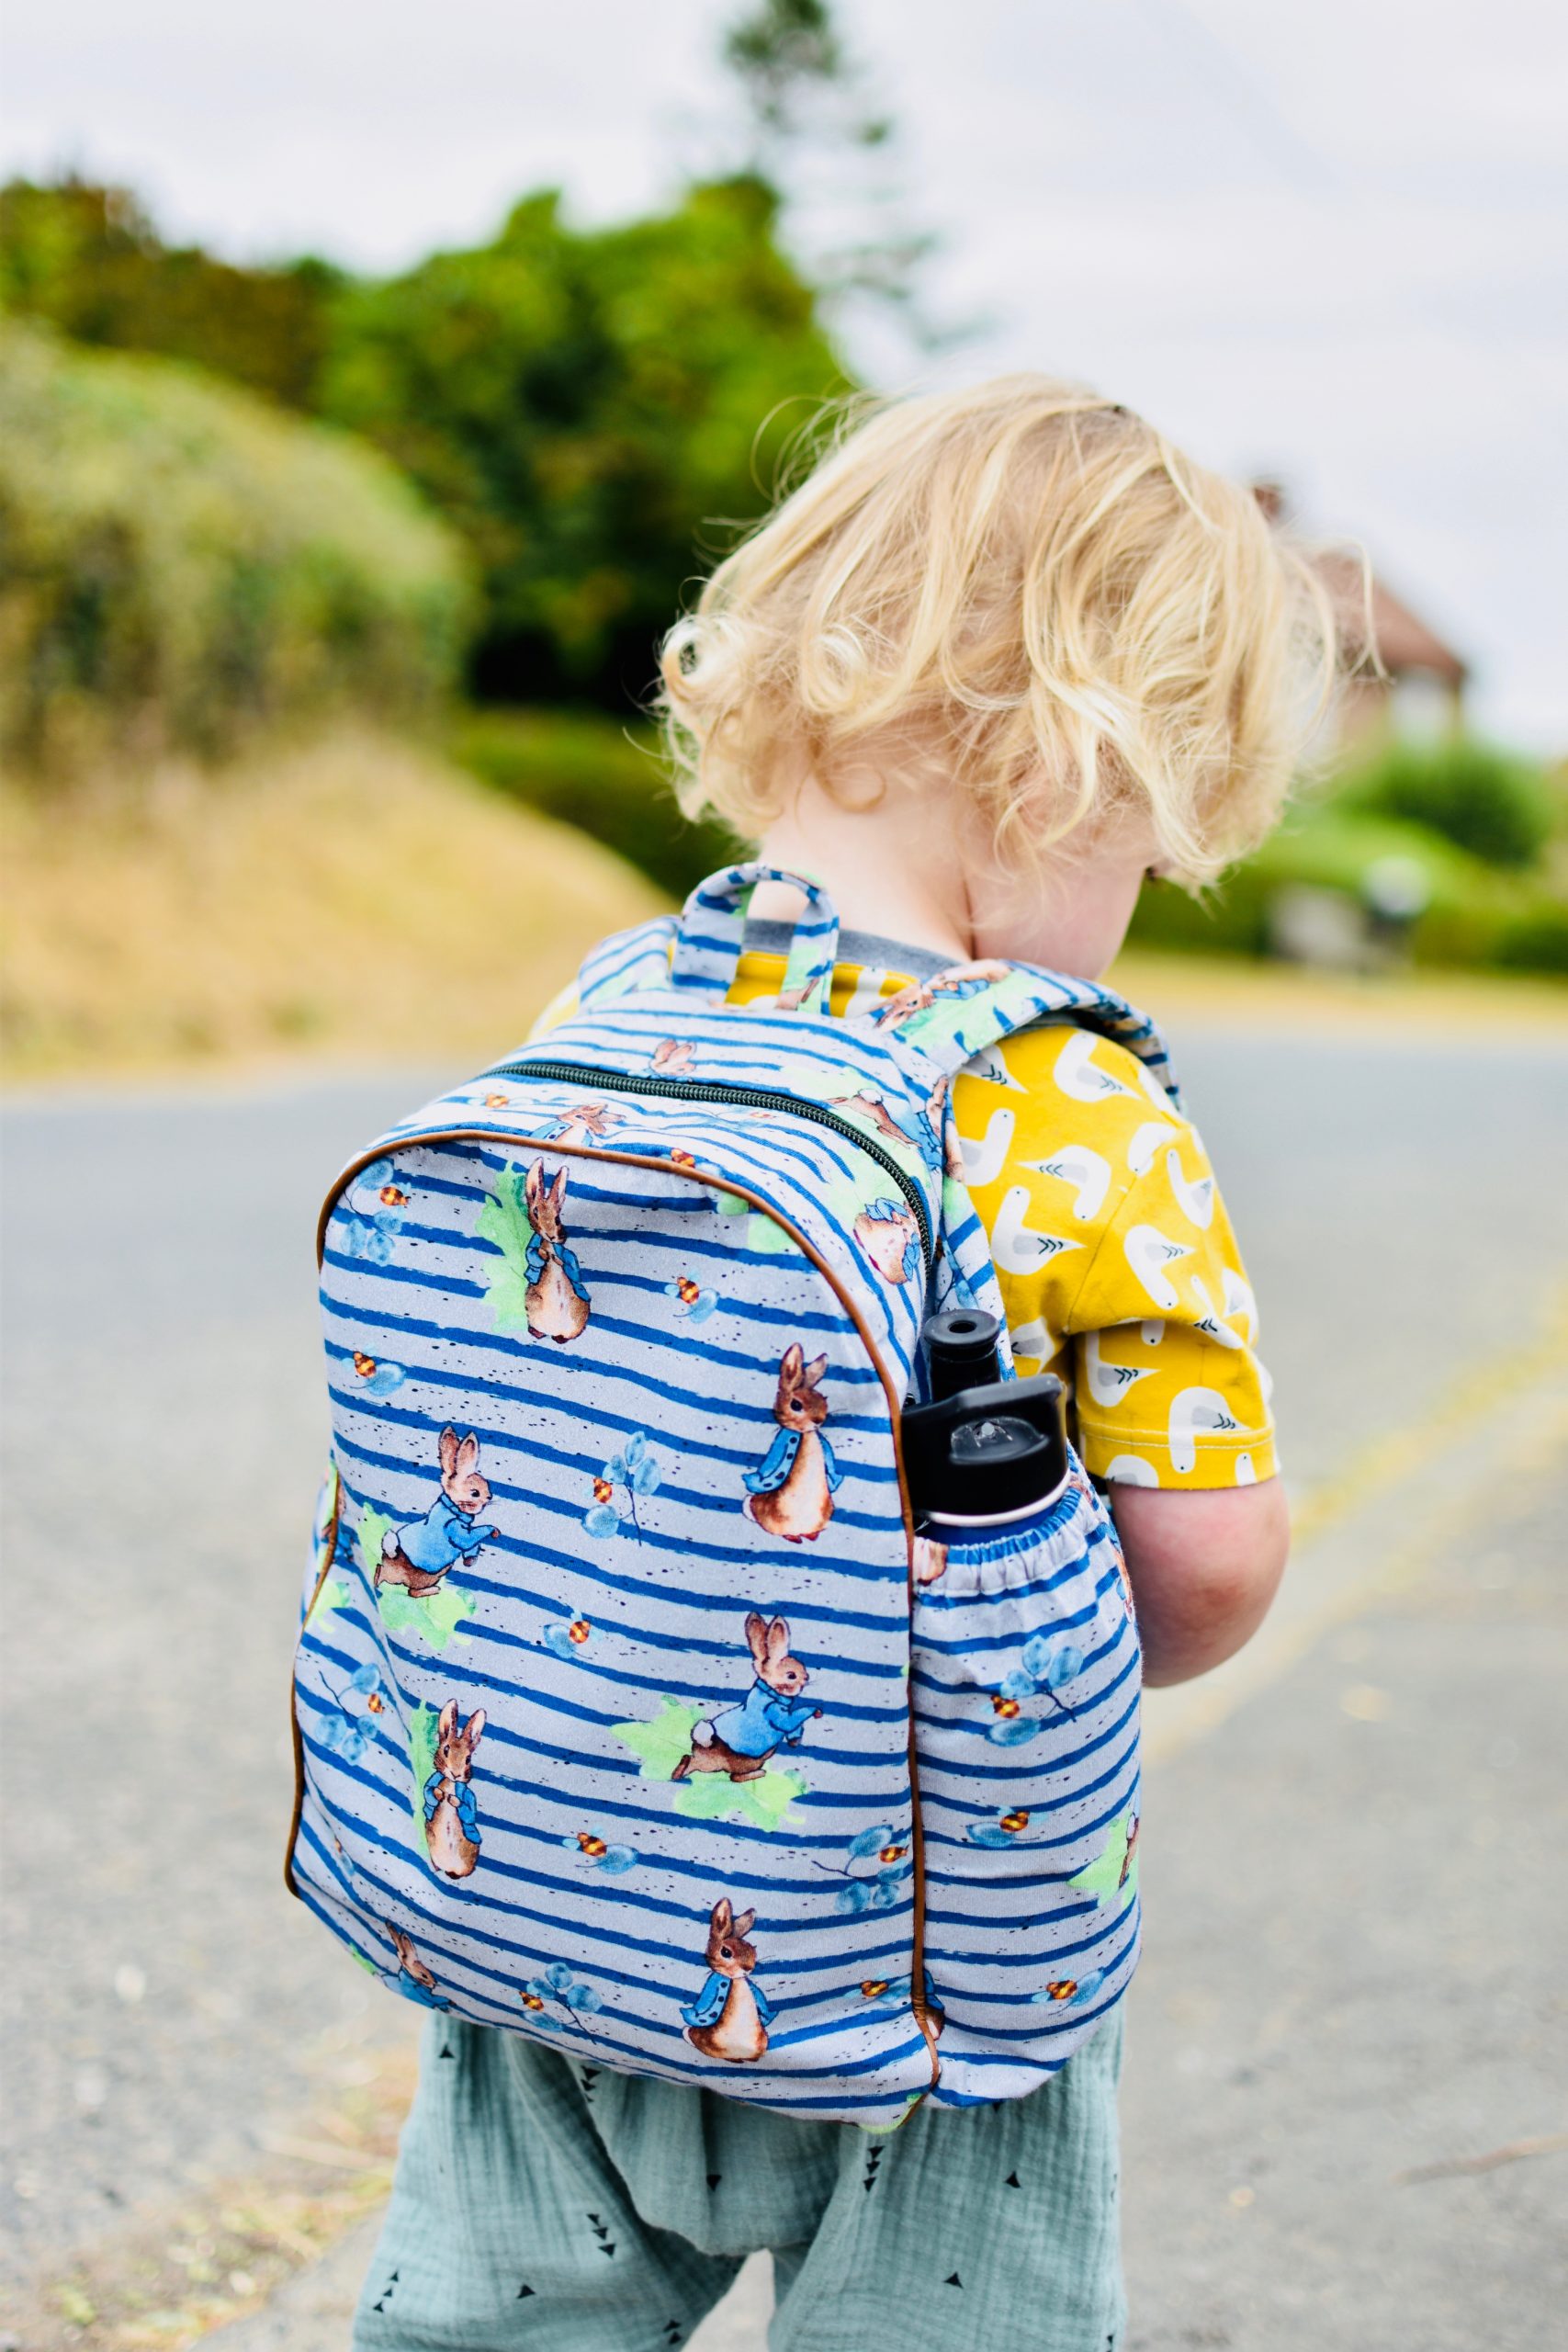 Child wearing the Children's Back to Cool Backpack sewing pattern from Waves & Wild on The Fold Line. A rucksack pattern made in canvas, twill or denim fabrics, featuring side pockets, adjustable wide shoulder straps, zip closure and piping.